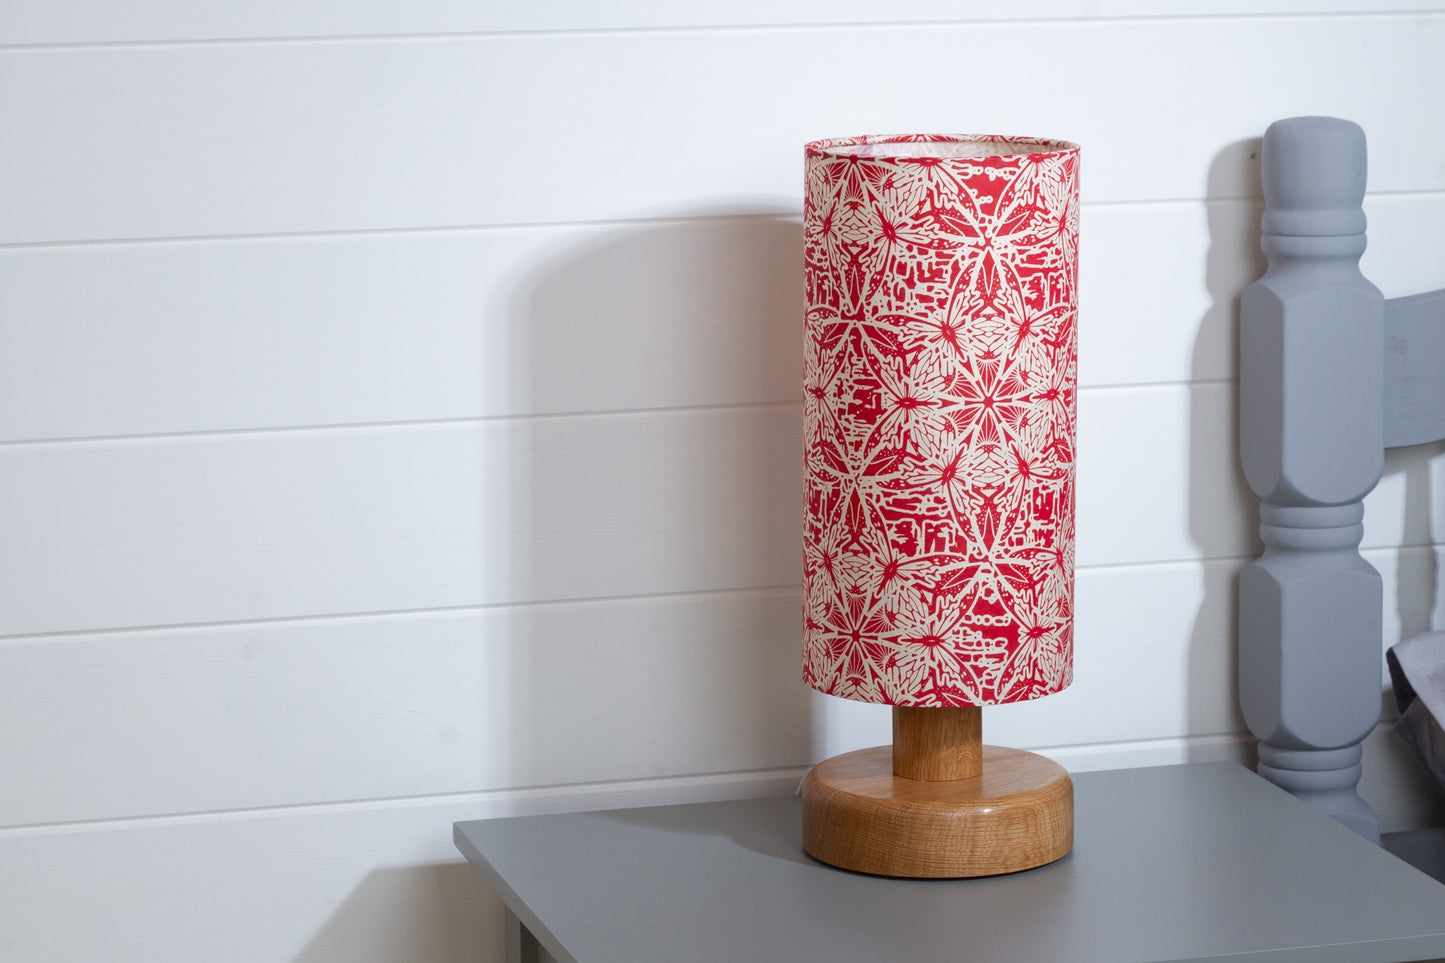 Round Oak Table Lamp (15cm) with 15cm x 30cm Drum Lampshade in B137 ~ Butterfly Kaleidoscope Red